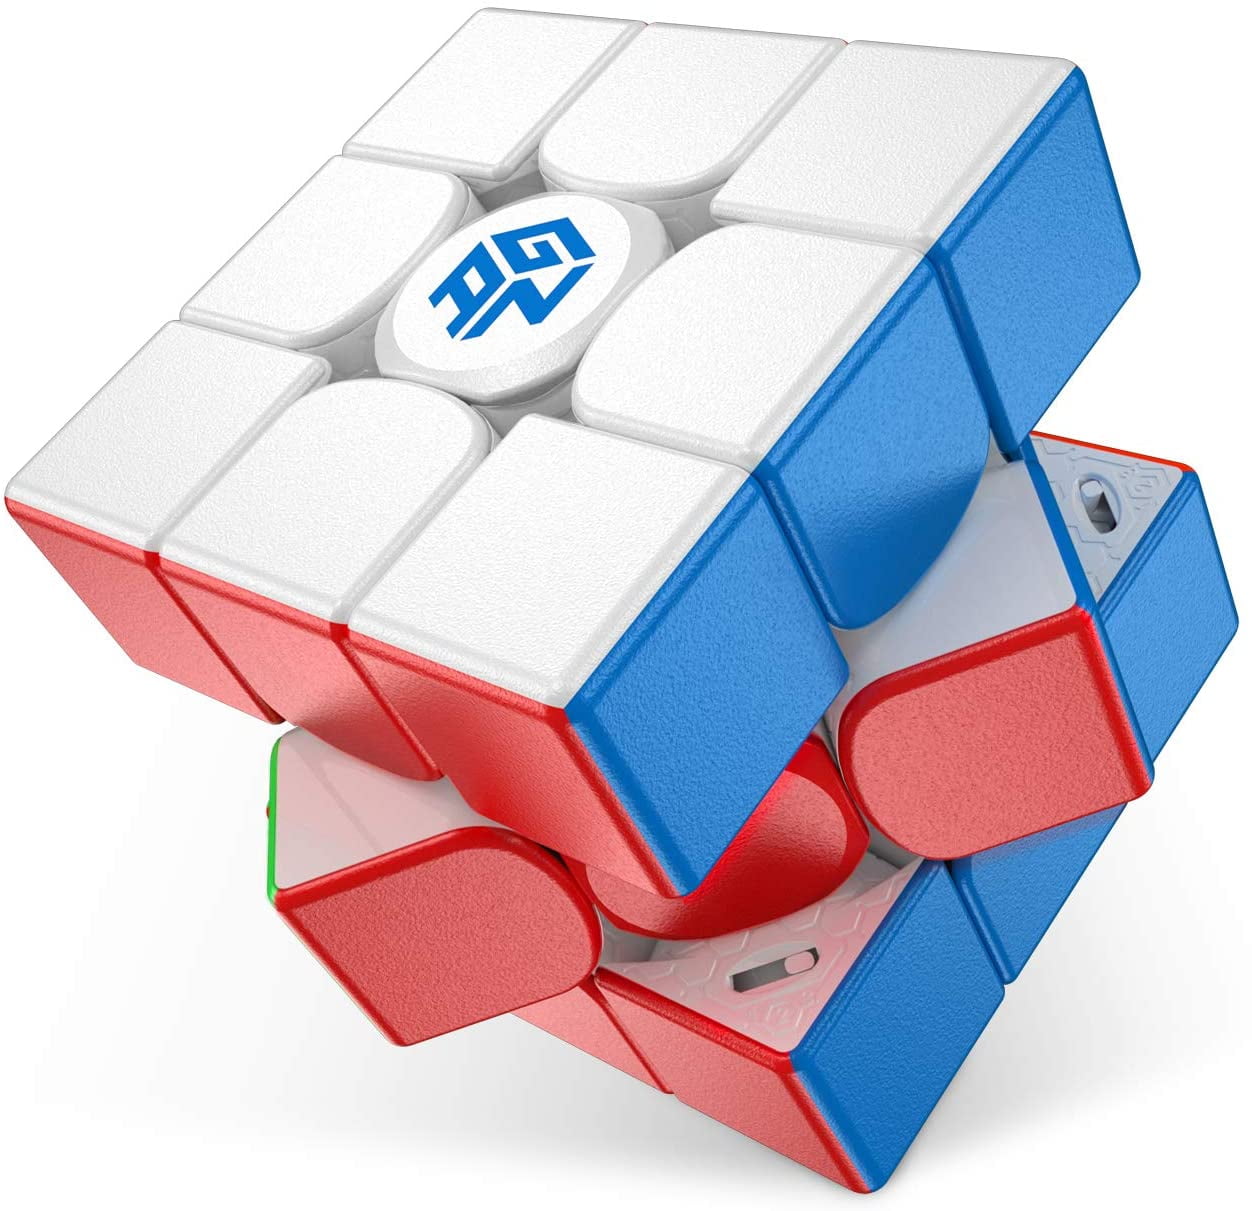 GAN 11 M Pro, 3x3 Magnetic Speed Cube Stickerless Puzzle Cube Magic Cube Frosted Surface